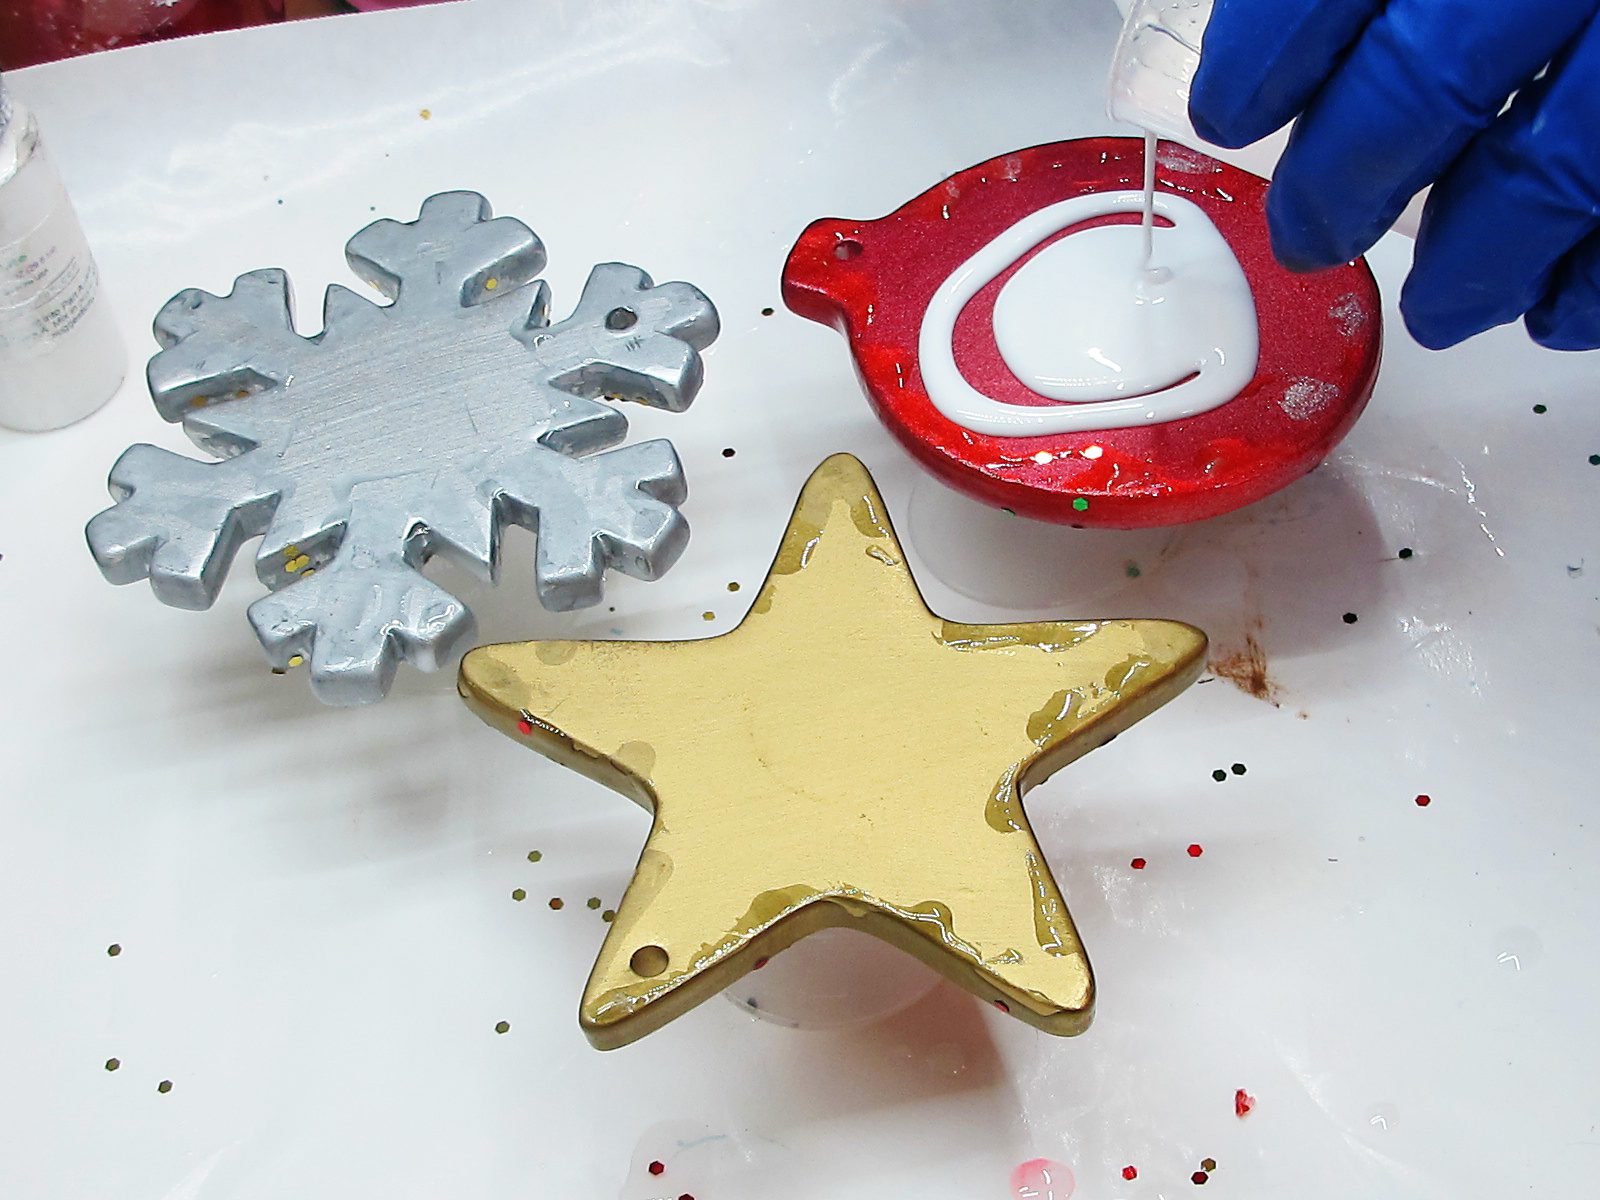 Pouring white resin on Christmas ornaments.